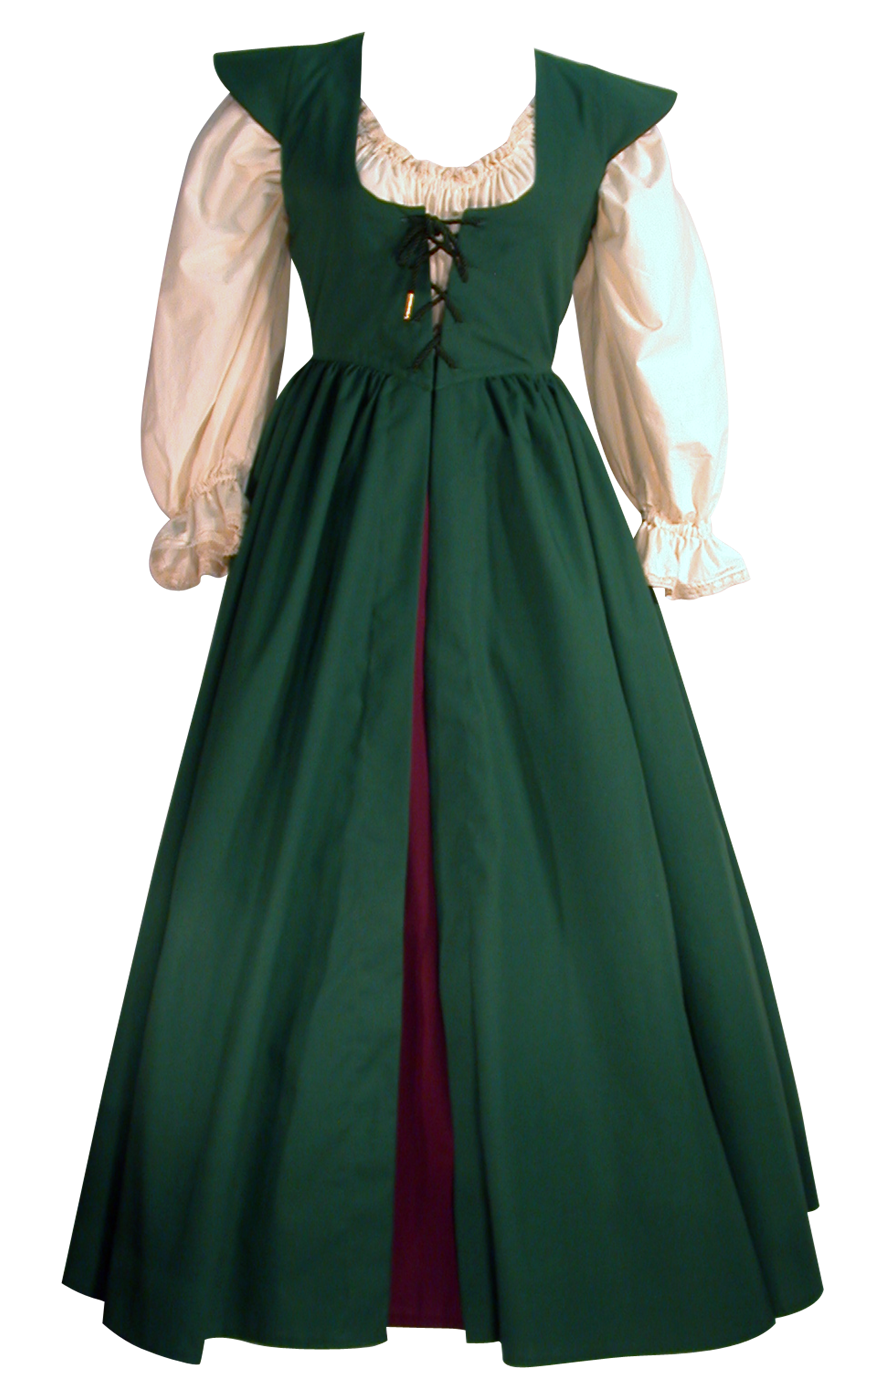 Elizabethan Gown by White Pavilion Costumes, front view. This gown is ideal for renaissance and medieval costumes, and can also be adapted for 18th century and Victorian styles, including Steampunk, Goth, and vampire costumes; and it's also useful for fantasy and fairytale costumes.